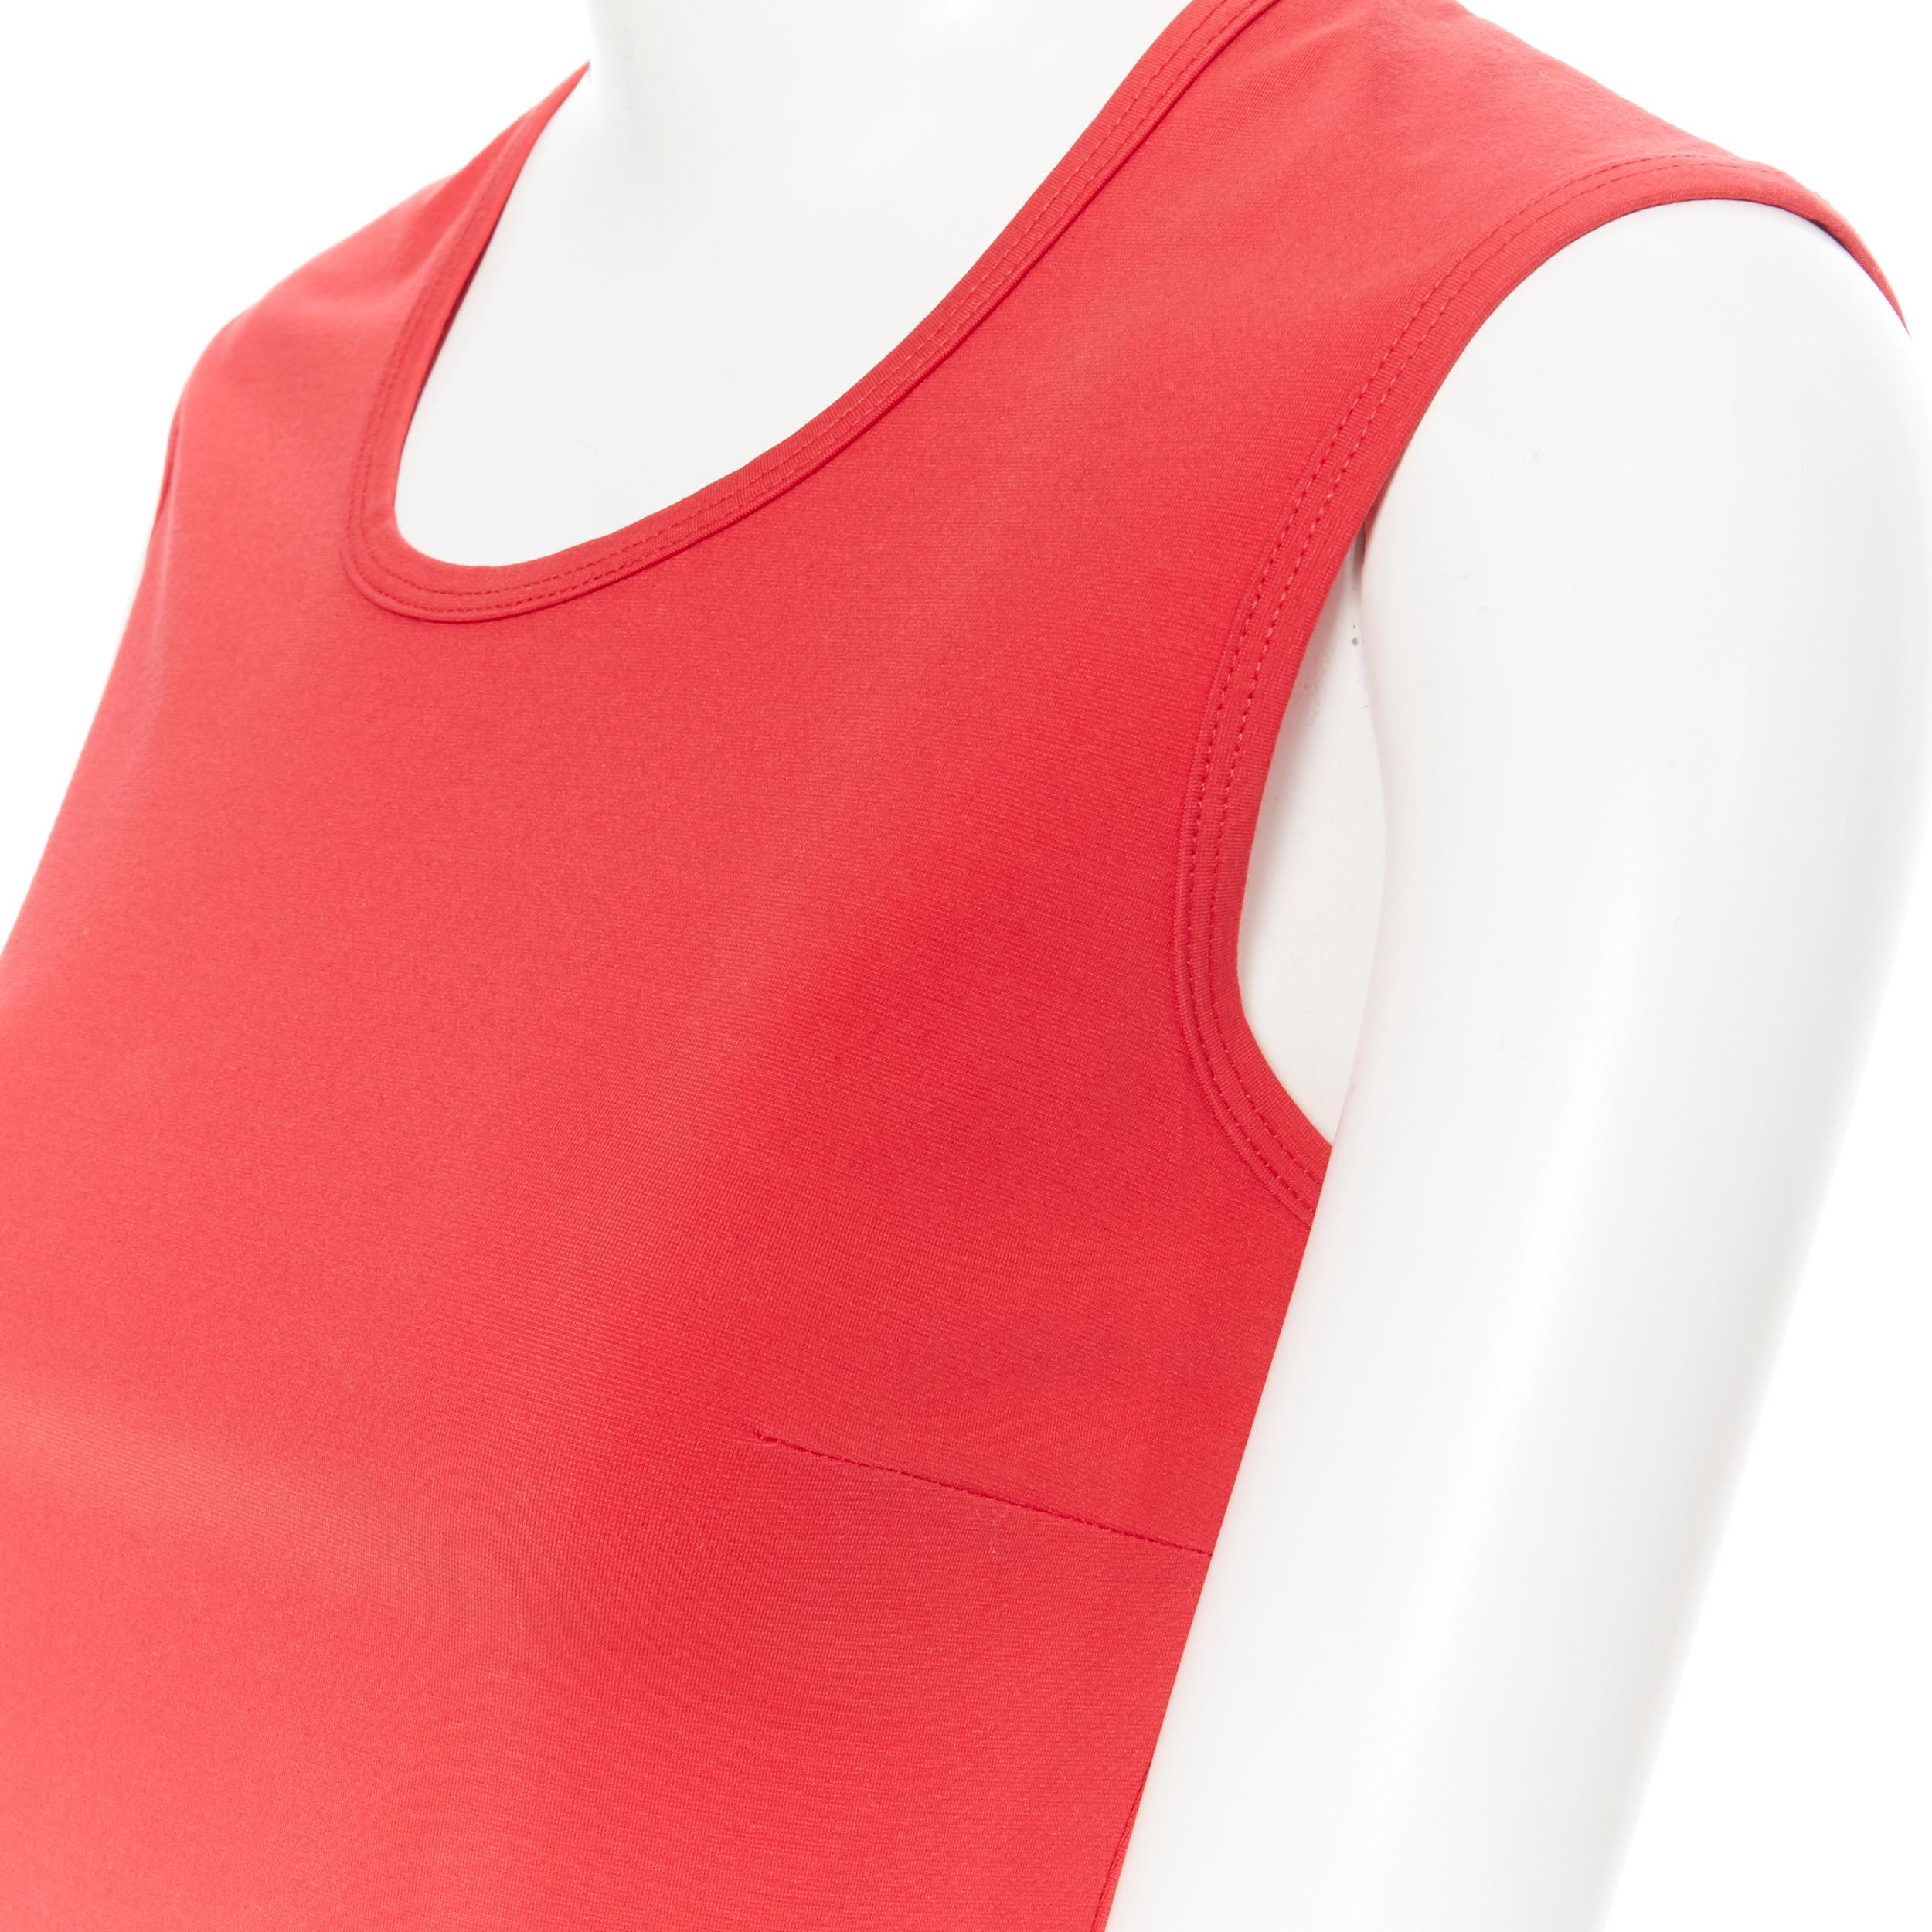 MICHAEL KORS red cotton blend scoop neck sleeveless vest top S 
Reference: LNKO/A01266 
Brand: Michael Kors 
Material: Cotton 
Color: Red 
Pattern: Solid 
Extra Detail: Bust dart. 
Made in: Italy 

CONDITION: 
Condition: Very good, this item was